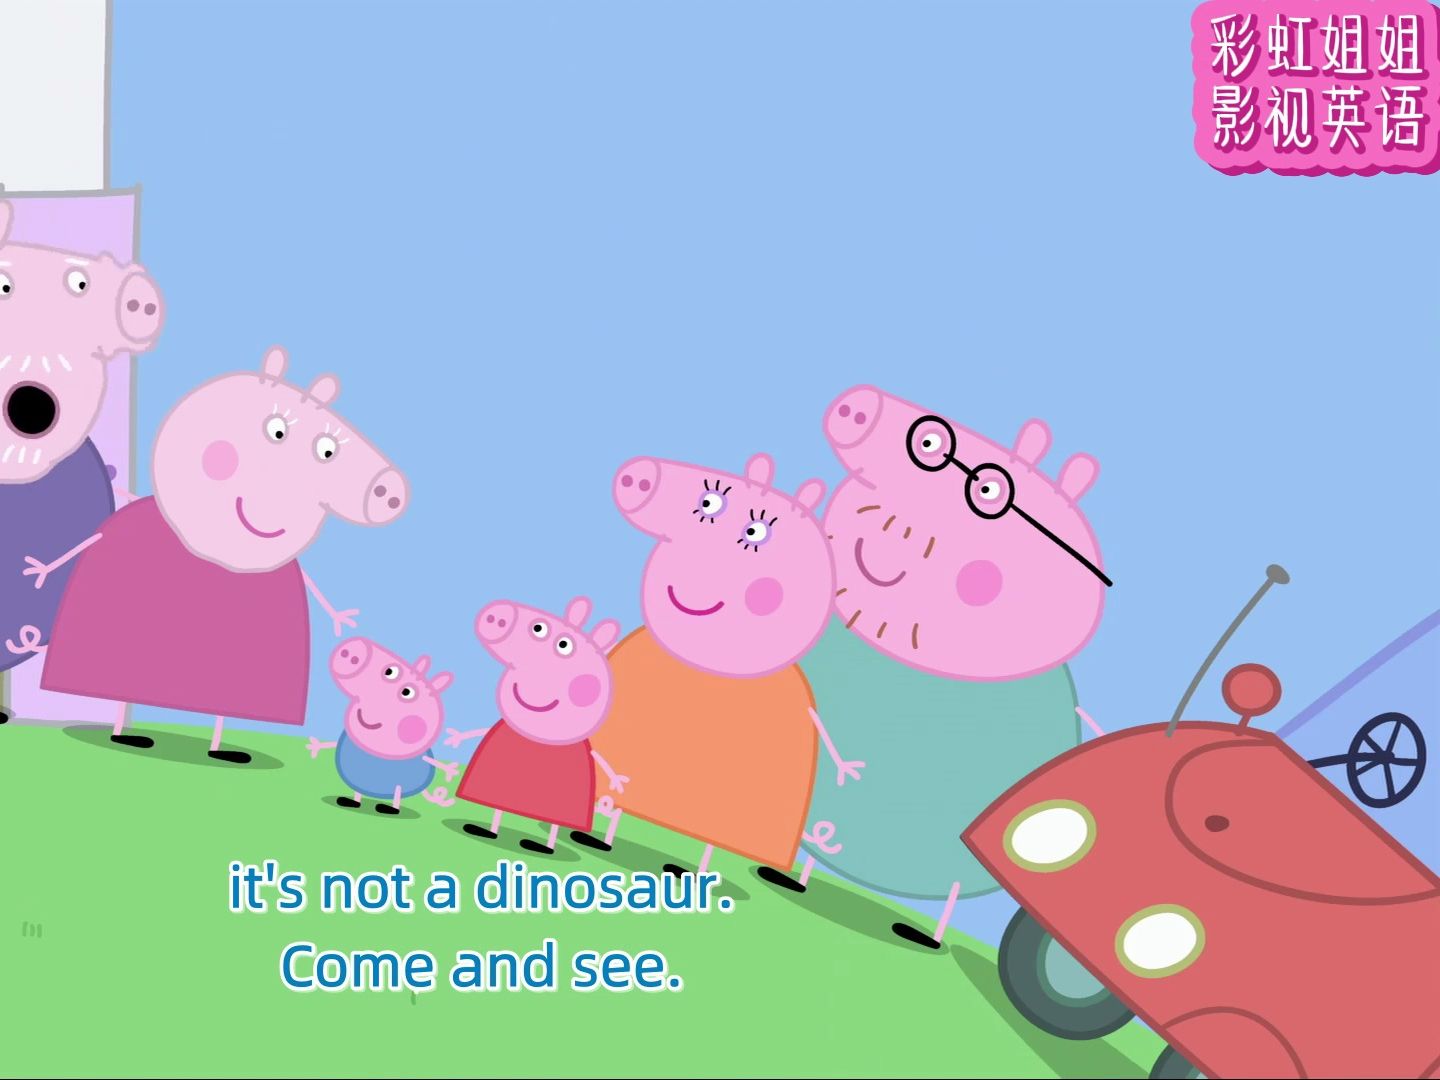 peppa pig s01e04小猪佩奇第一季第4集polly parrot